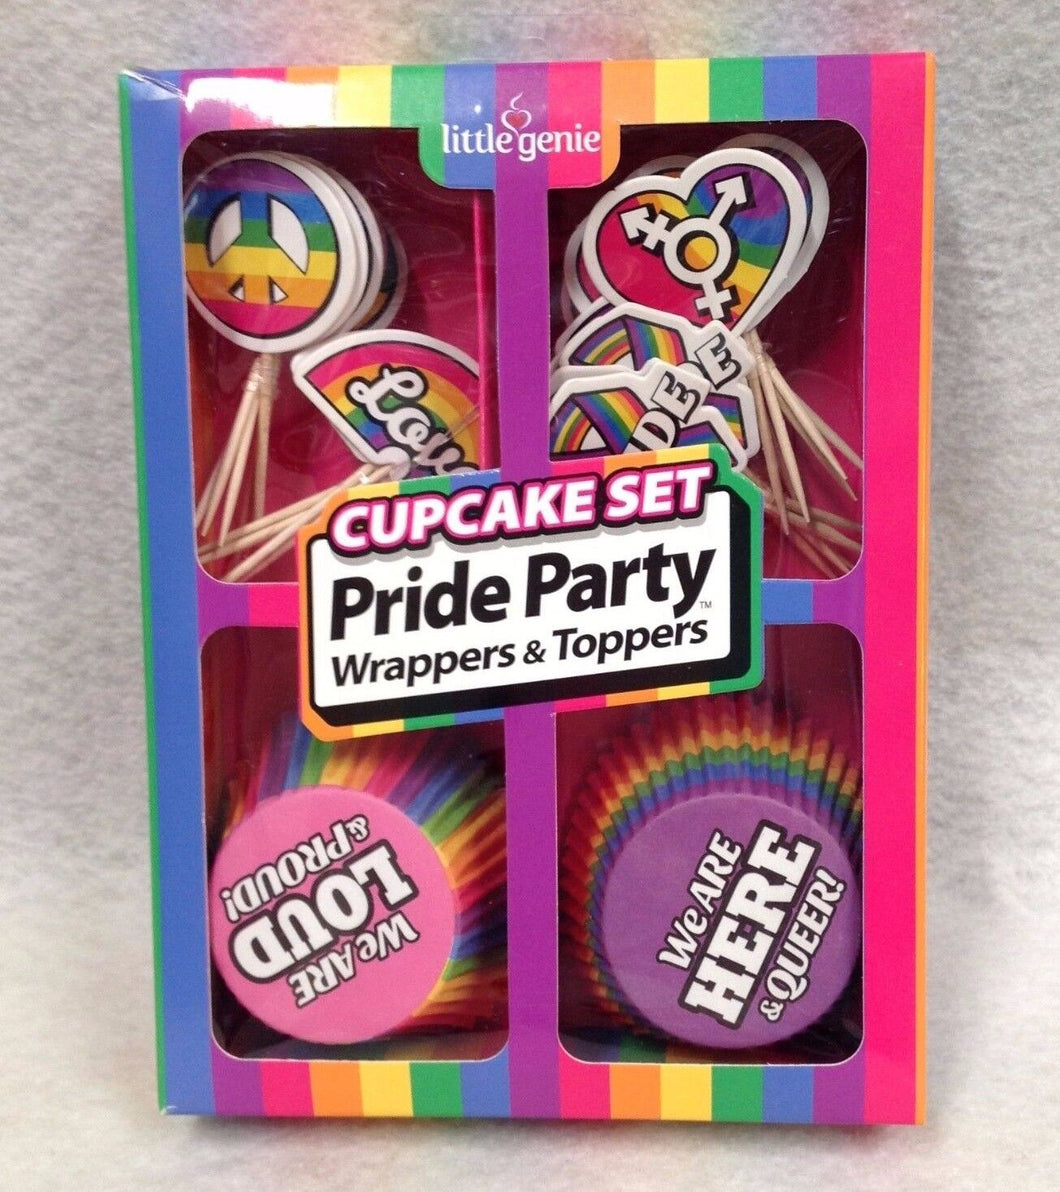 CUPCAKE SET PRIDE PARTY WRAPPERS